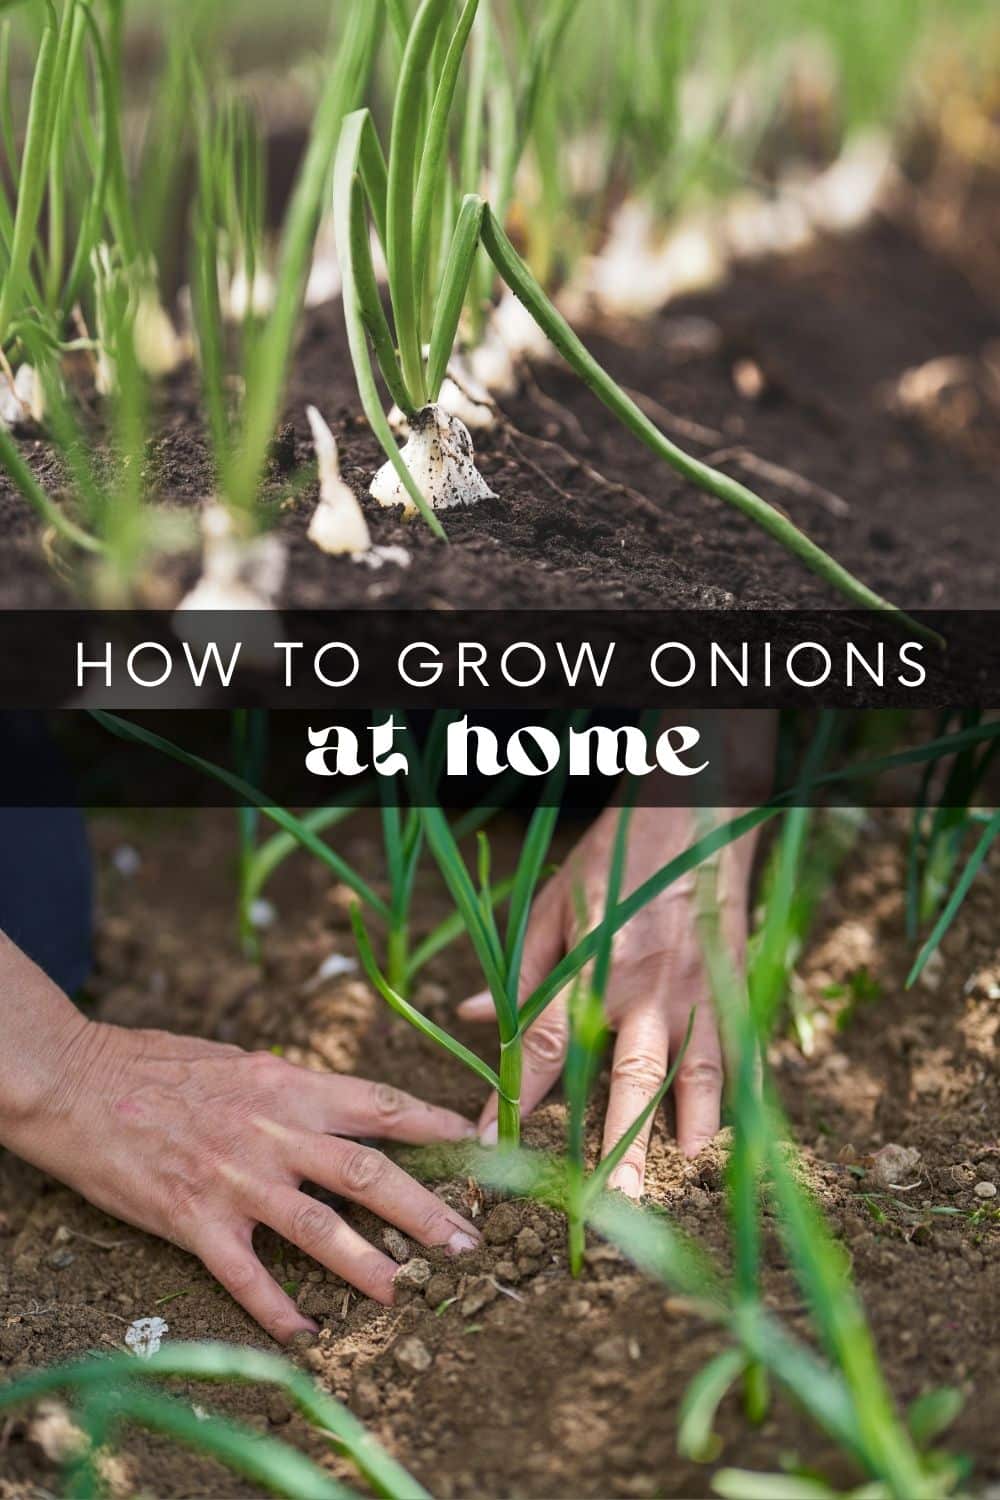 If you're looking for a low-maintenance crop that won't take up much space, onions are a great choice. There are many onion varieties to choose from, and you can grow them from seeds, sets, or transplants. But before you begin planting, there are a few things to consider.